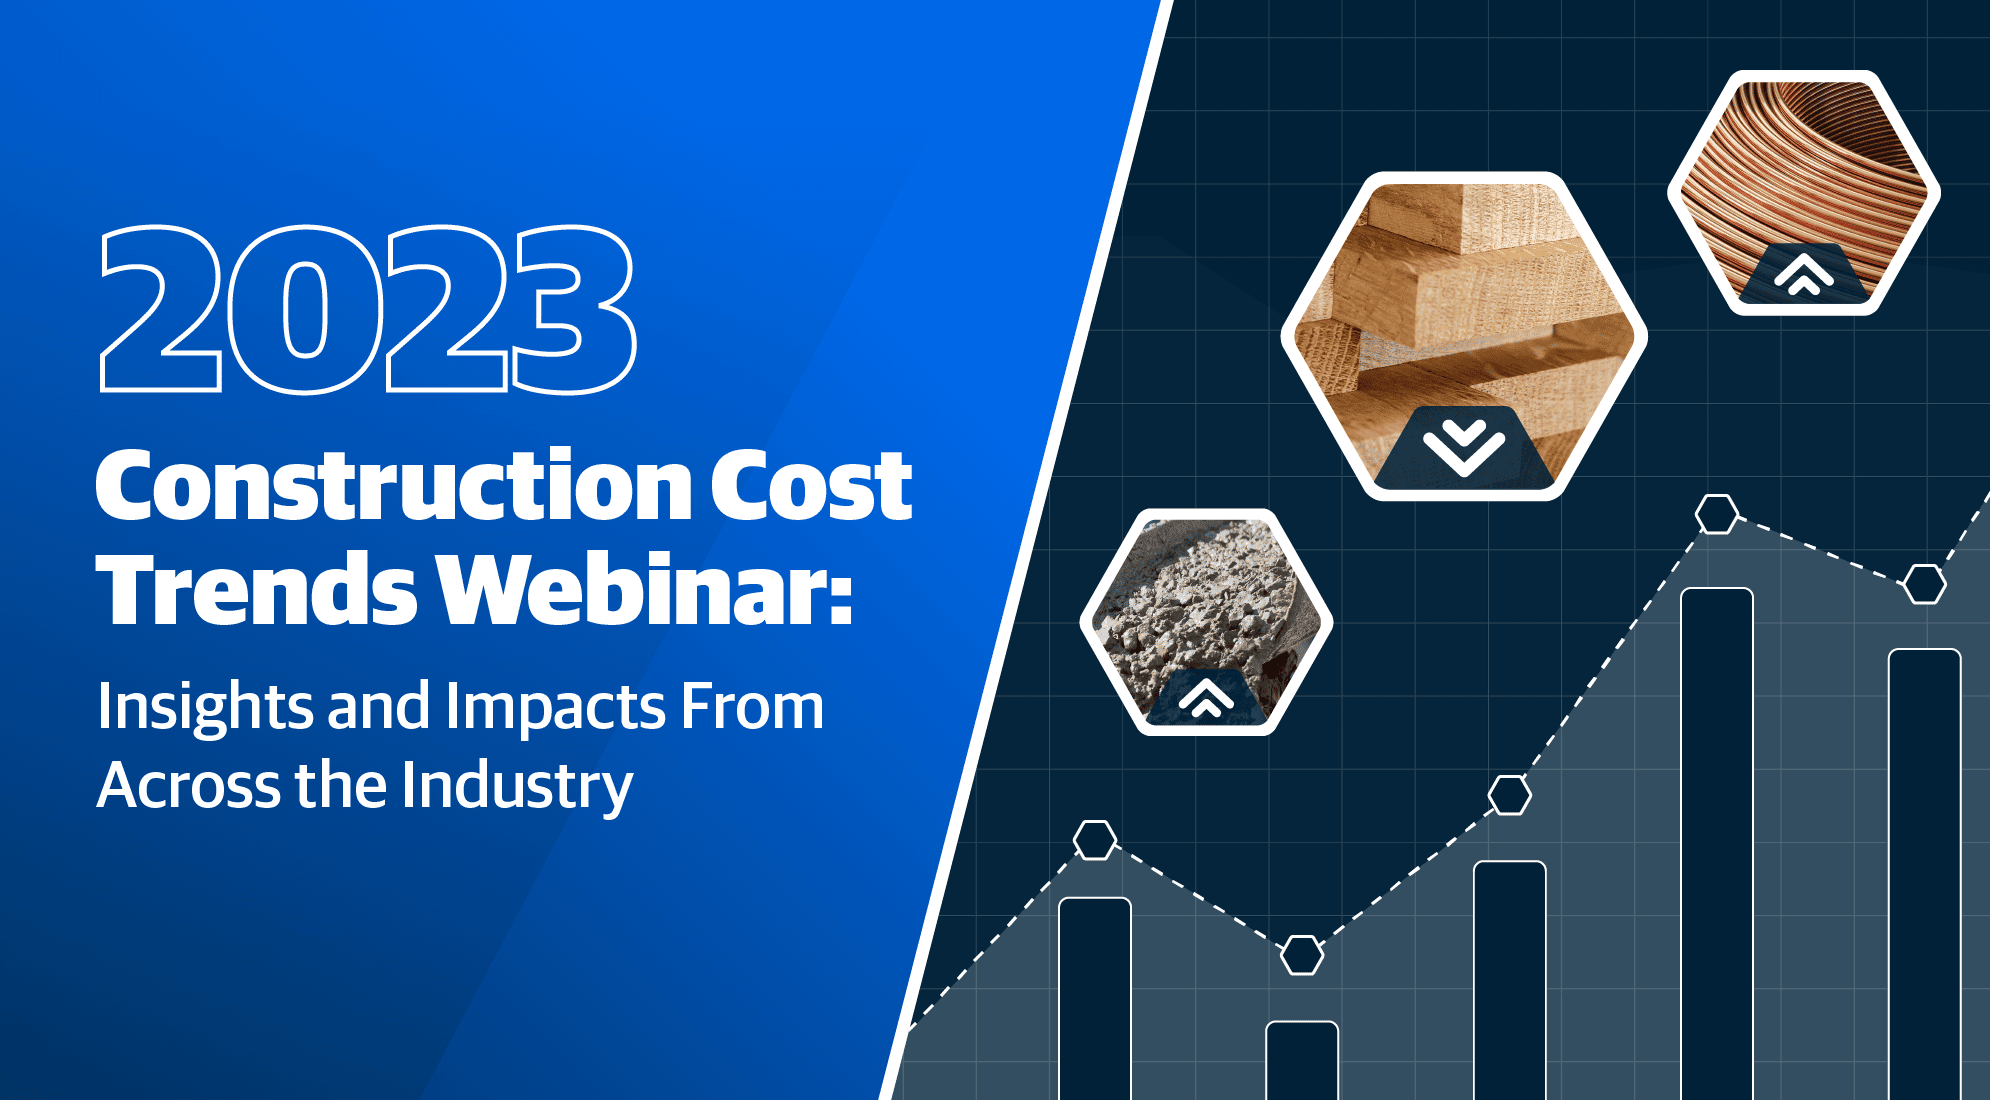 2023 Construction Cost Trends: Insights and Impacts from Across the Industry 6